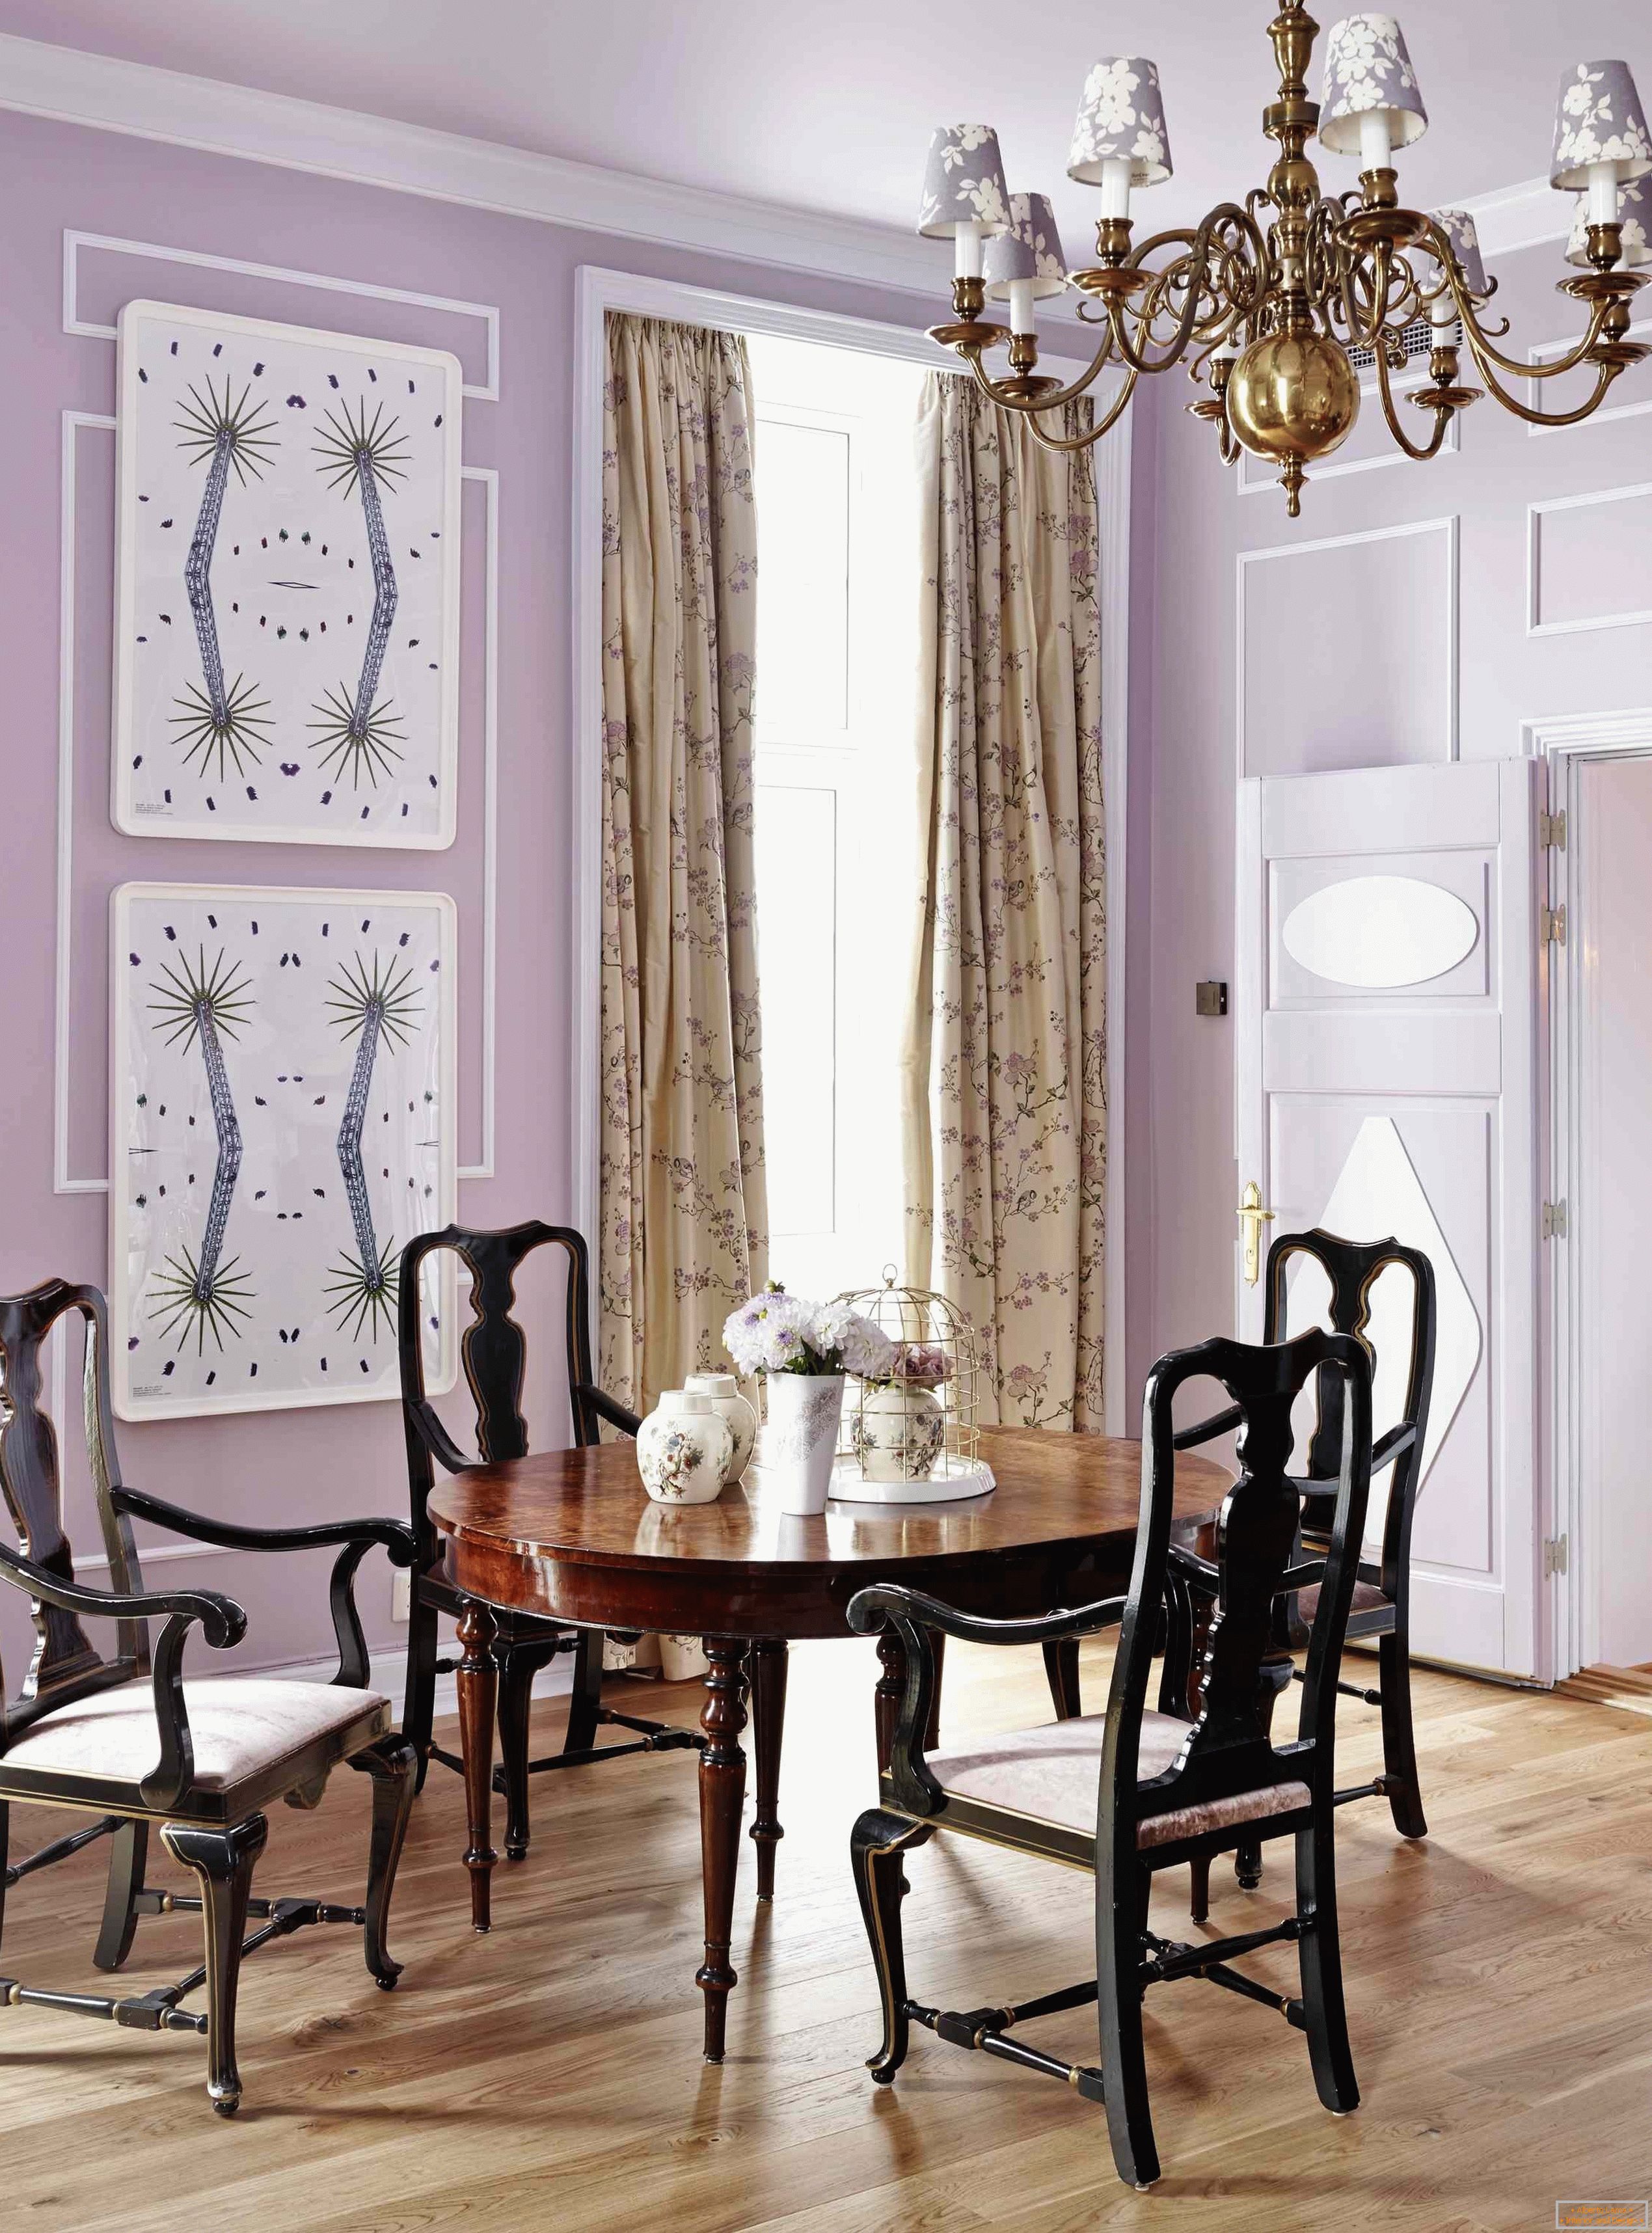 Moldings on the walls in the dining room